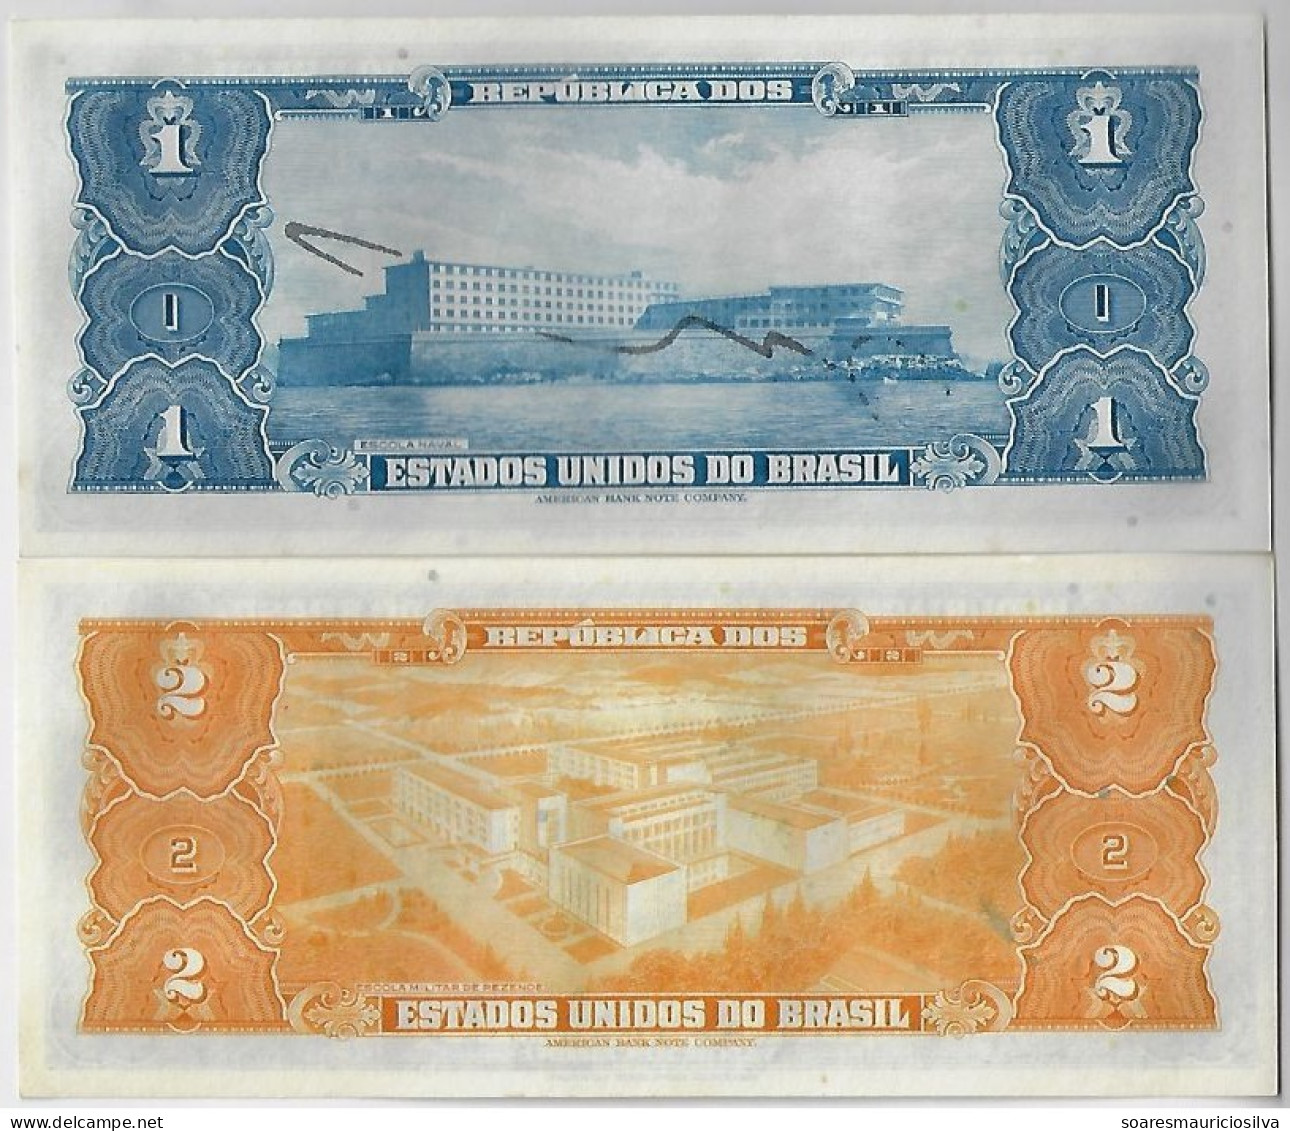 Brazil Year 1944 Banknote Amato-9 & 14 Pick-132 & 133 1 And 2 Cruzeiros Tamandaré And Caxias Uncirculated - Brasilien